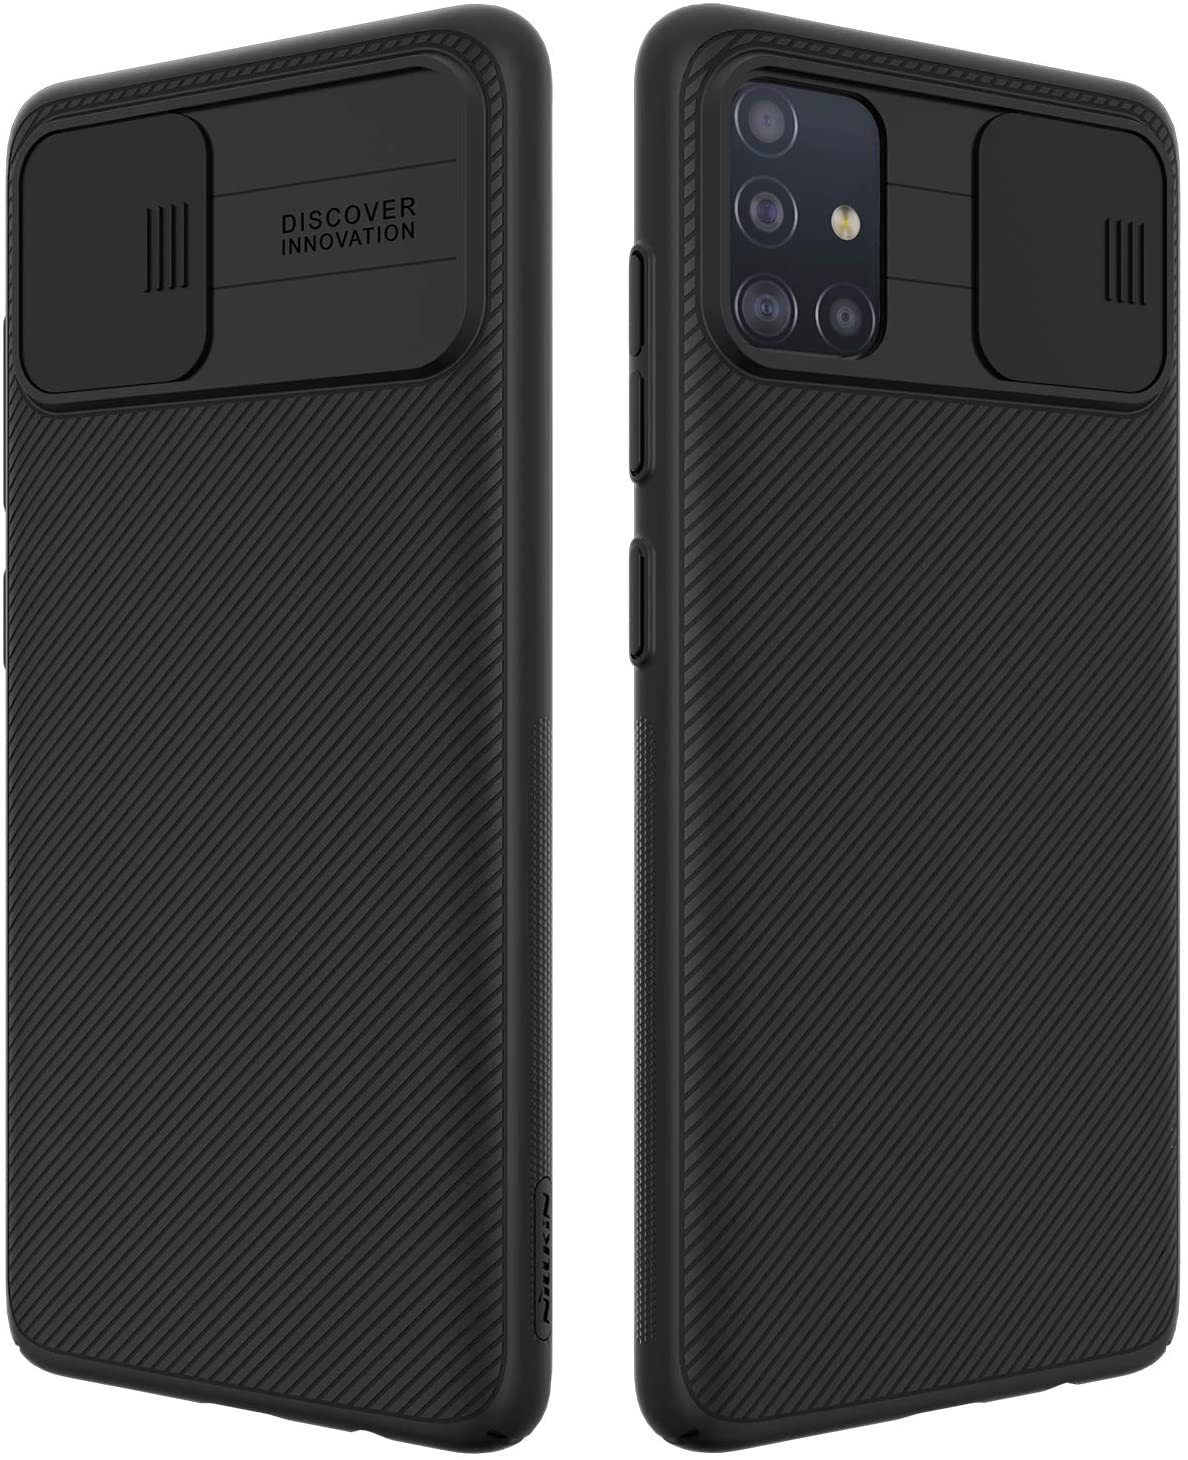 Nillkin Samsung Galaxy A03s Case with Protective with Slide Camera Cover, Black